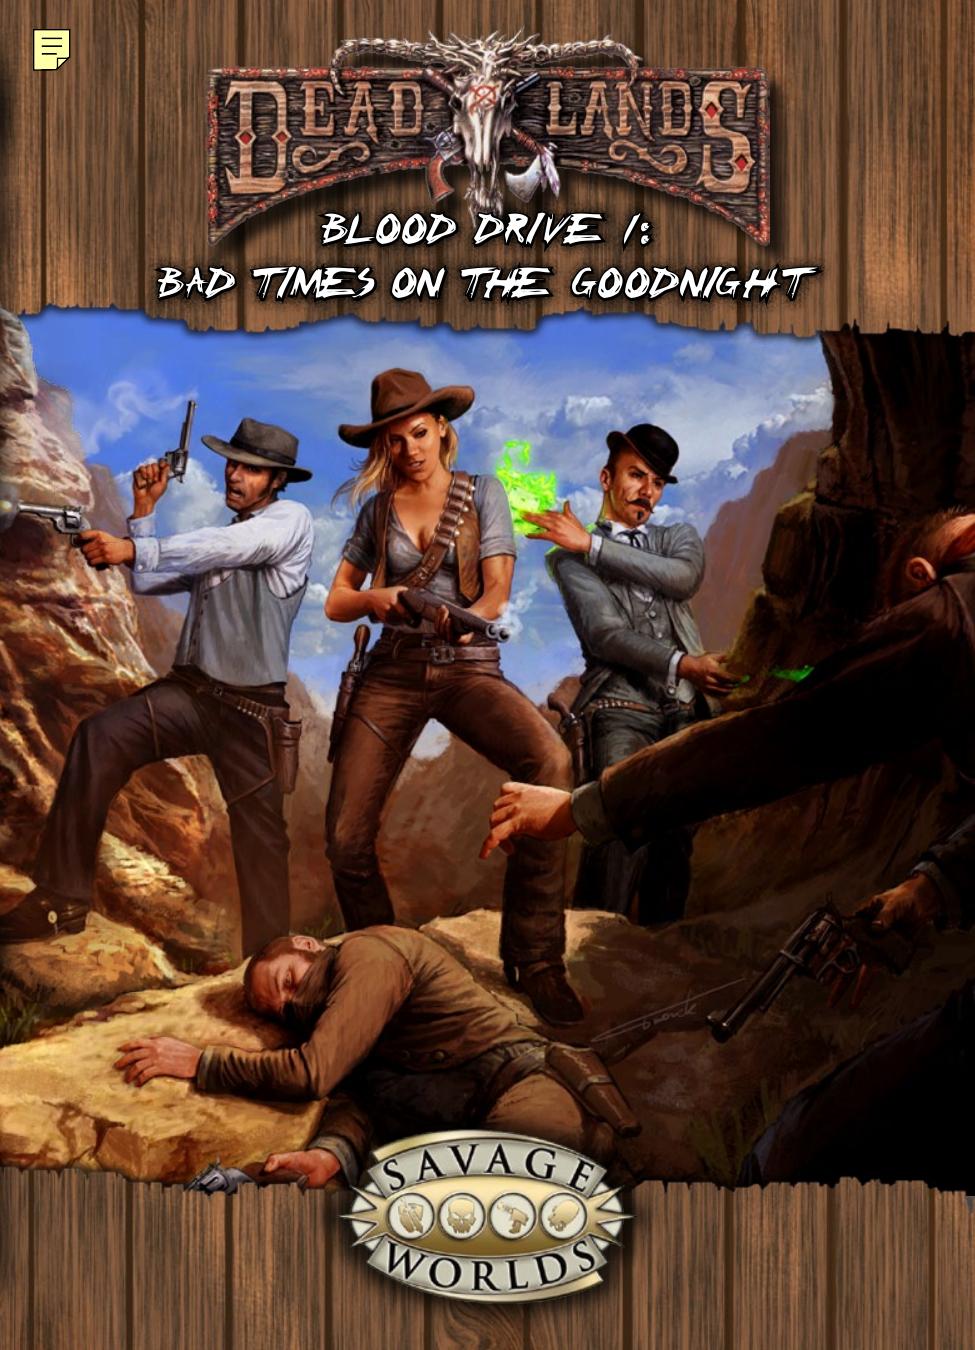 Deadlands Reloaded Adv Blood Drive 1 Bad Times on the Goodnight